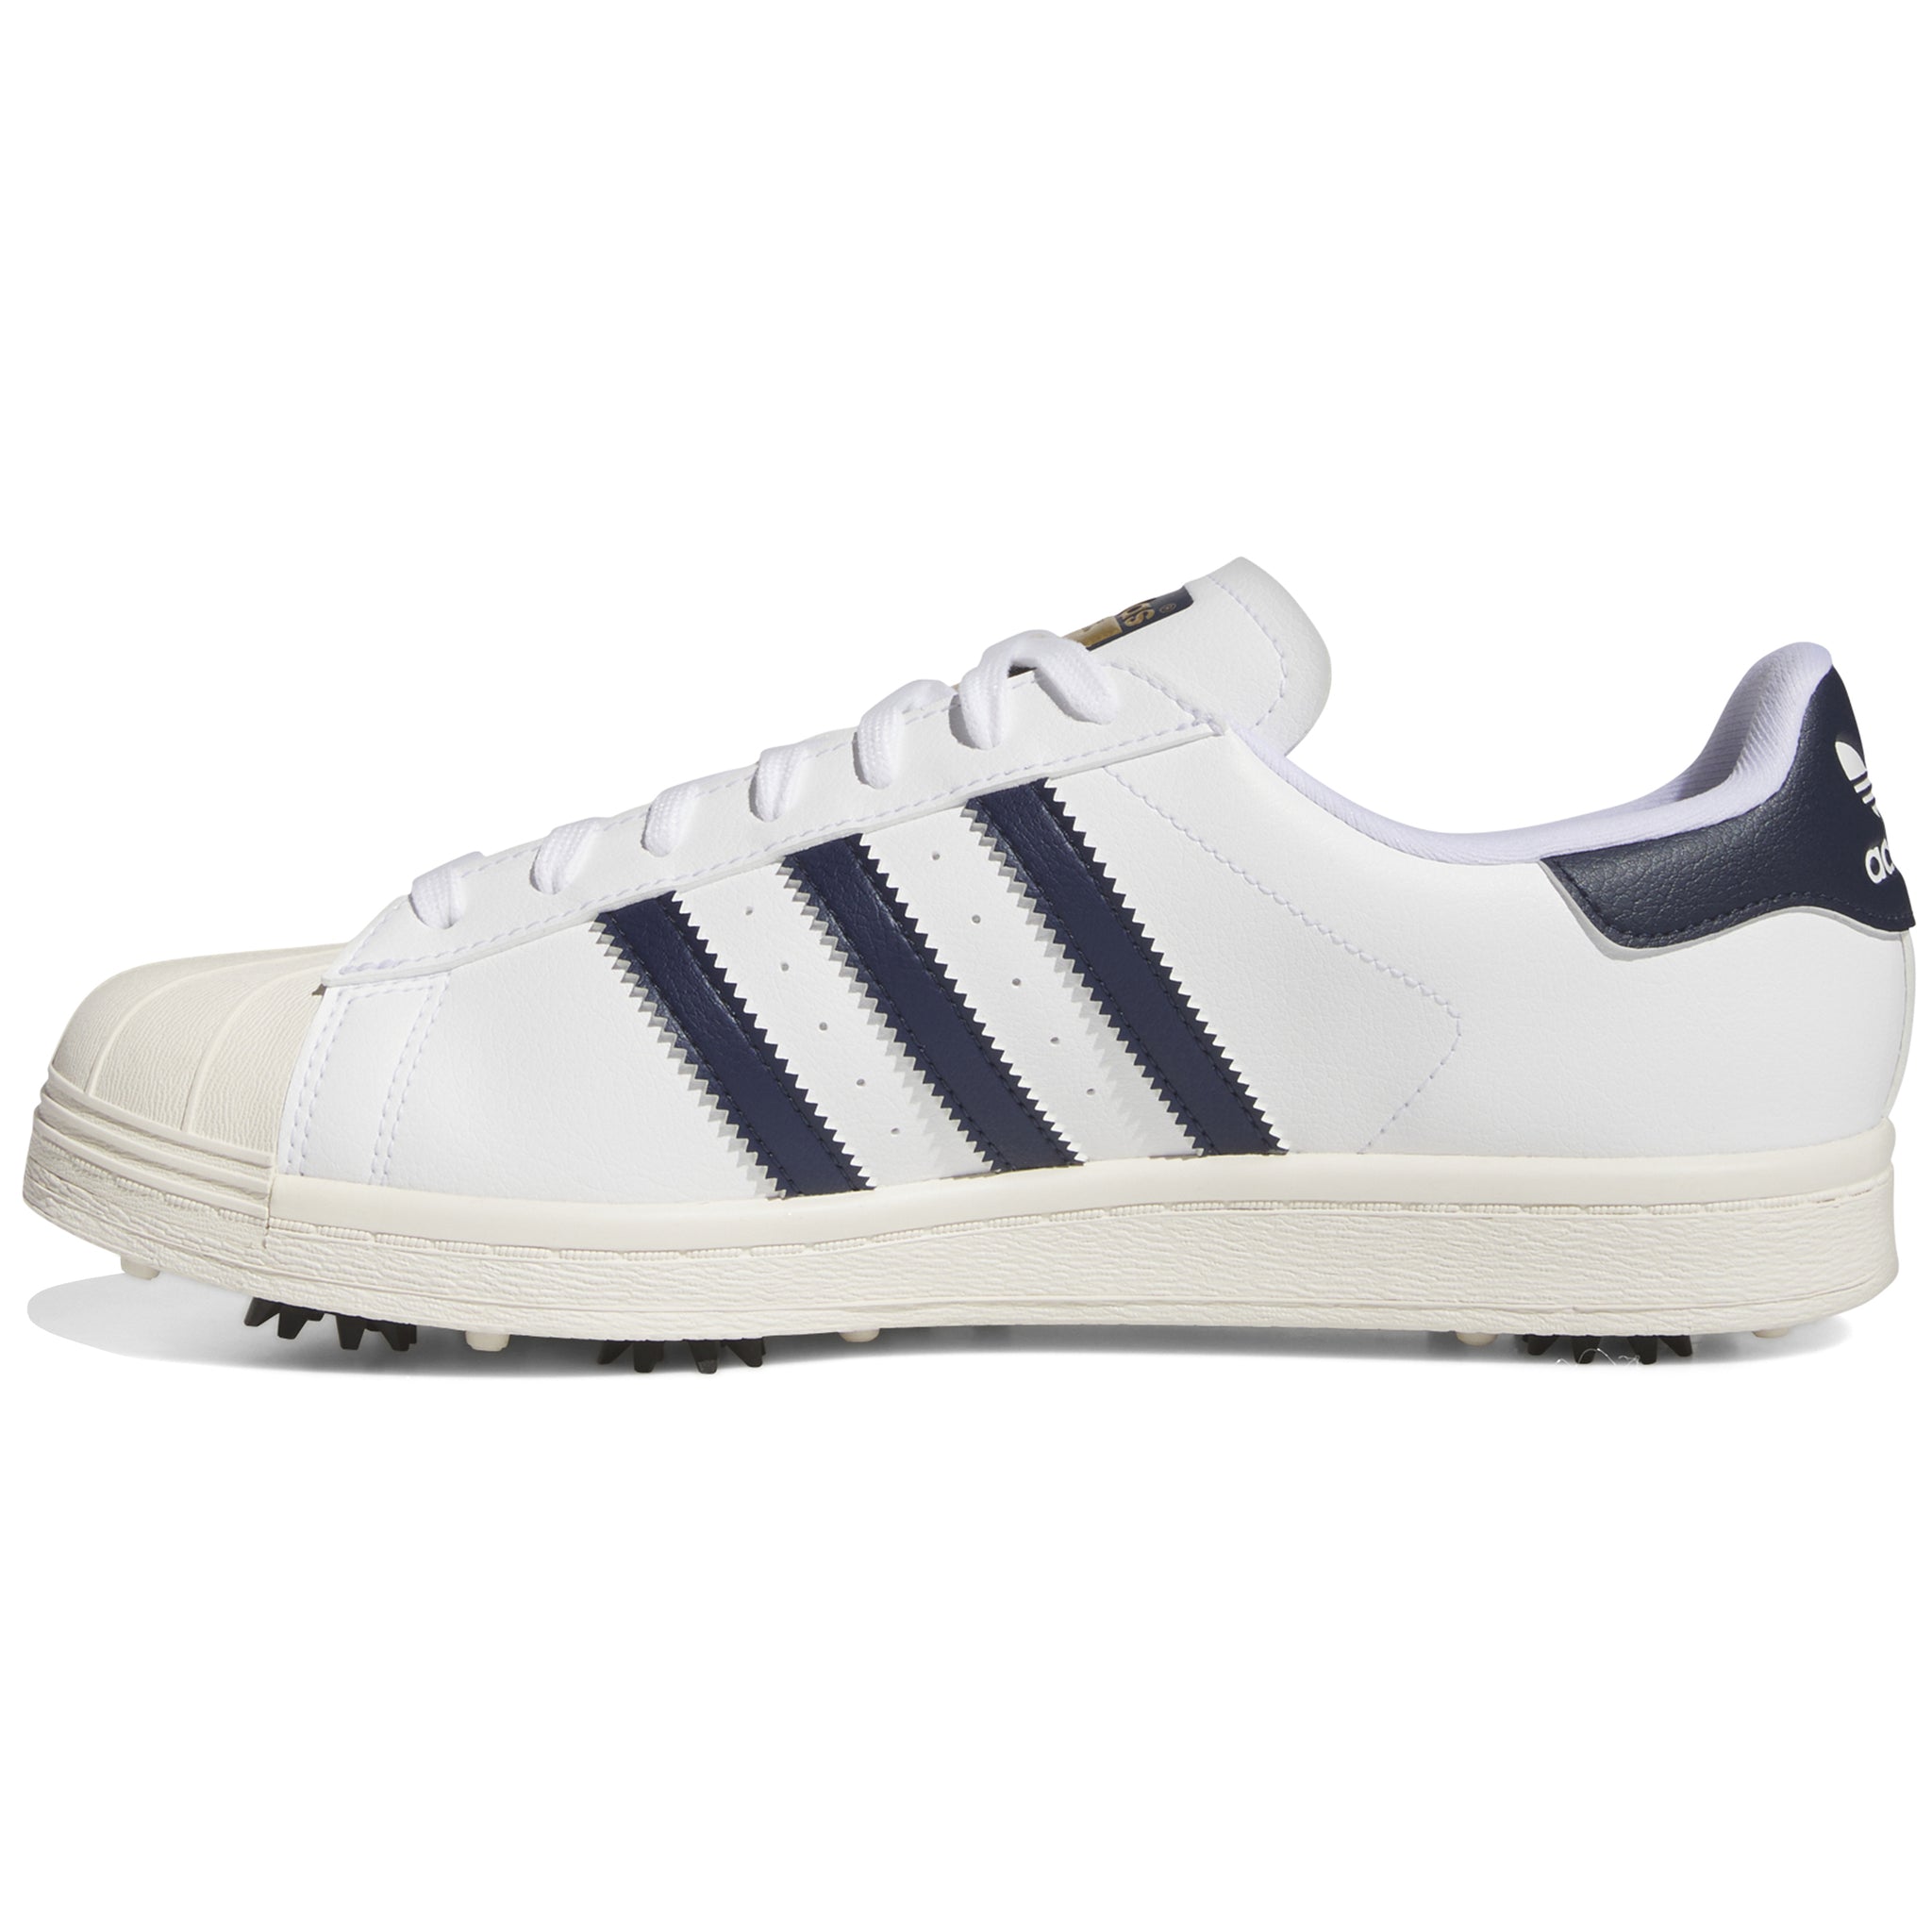 adidas-superstar-golf-shoes-id5003-white-collegiate-navy-off-white